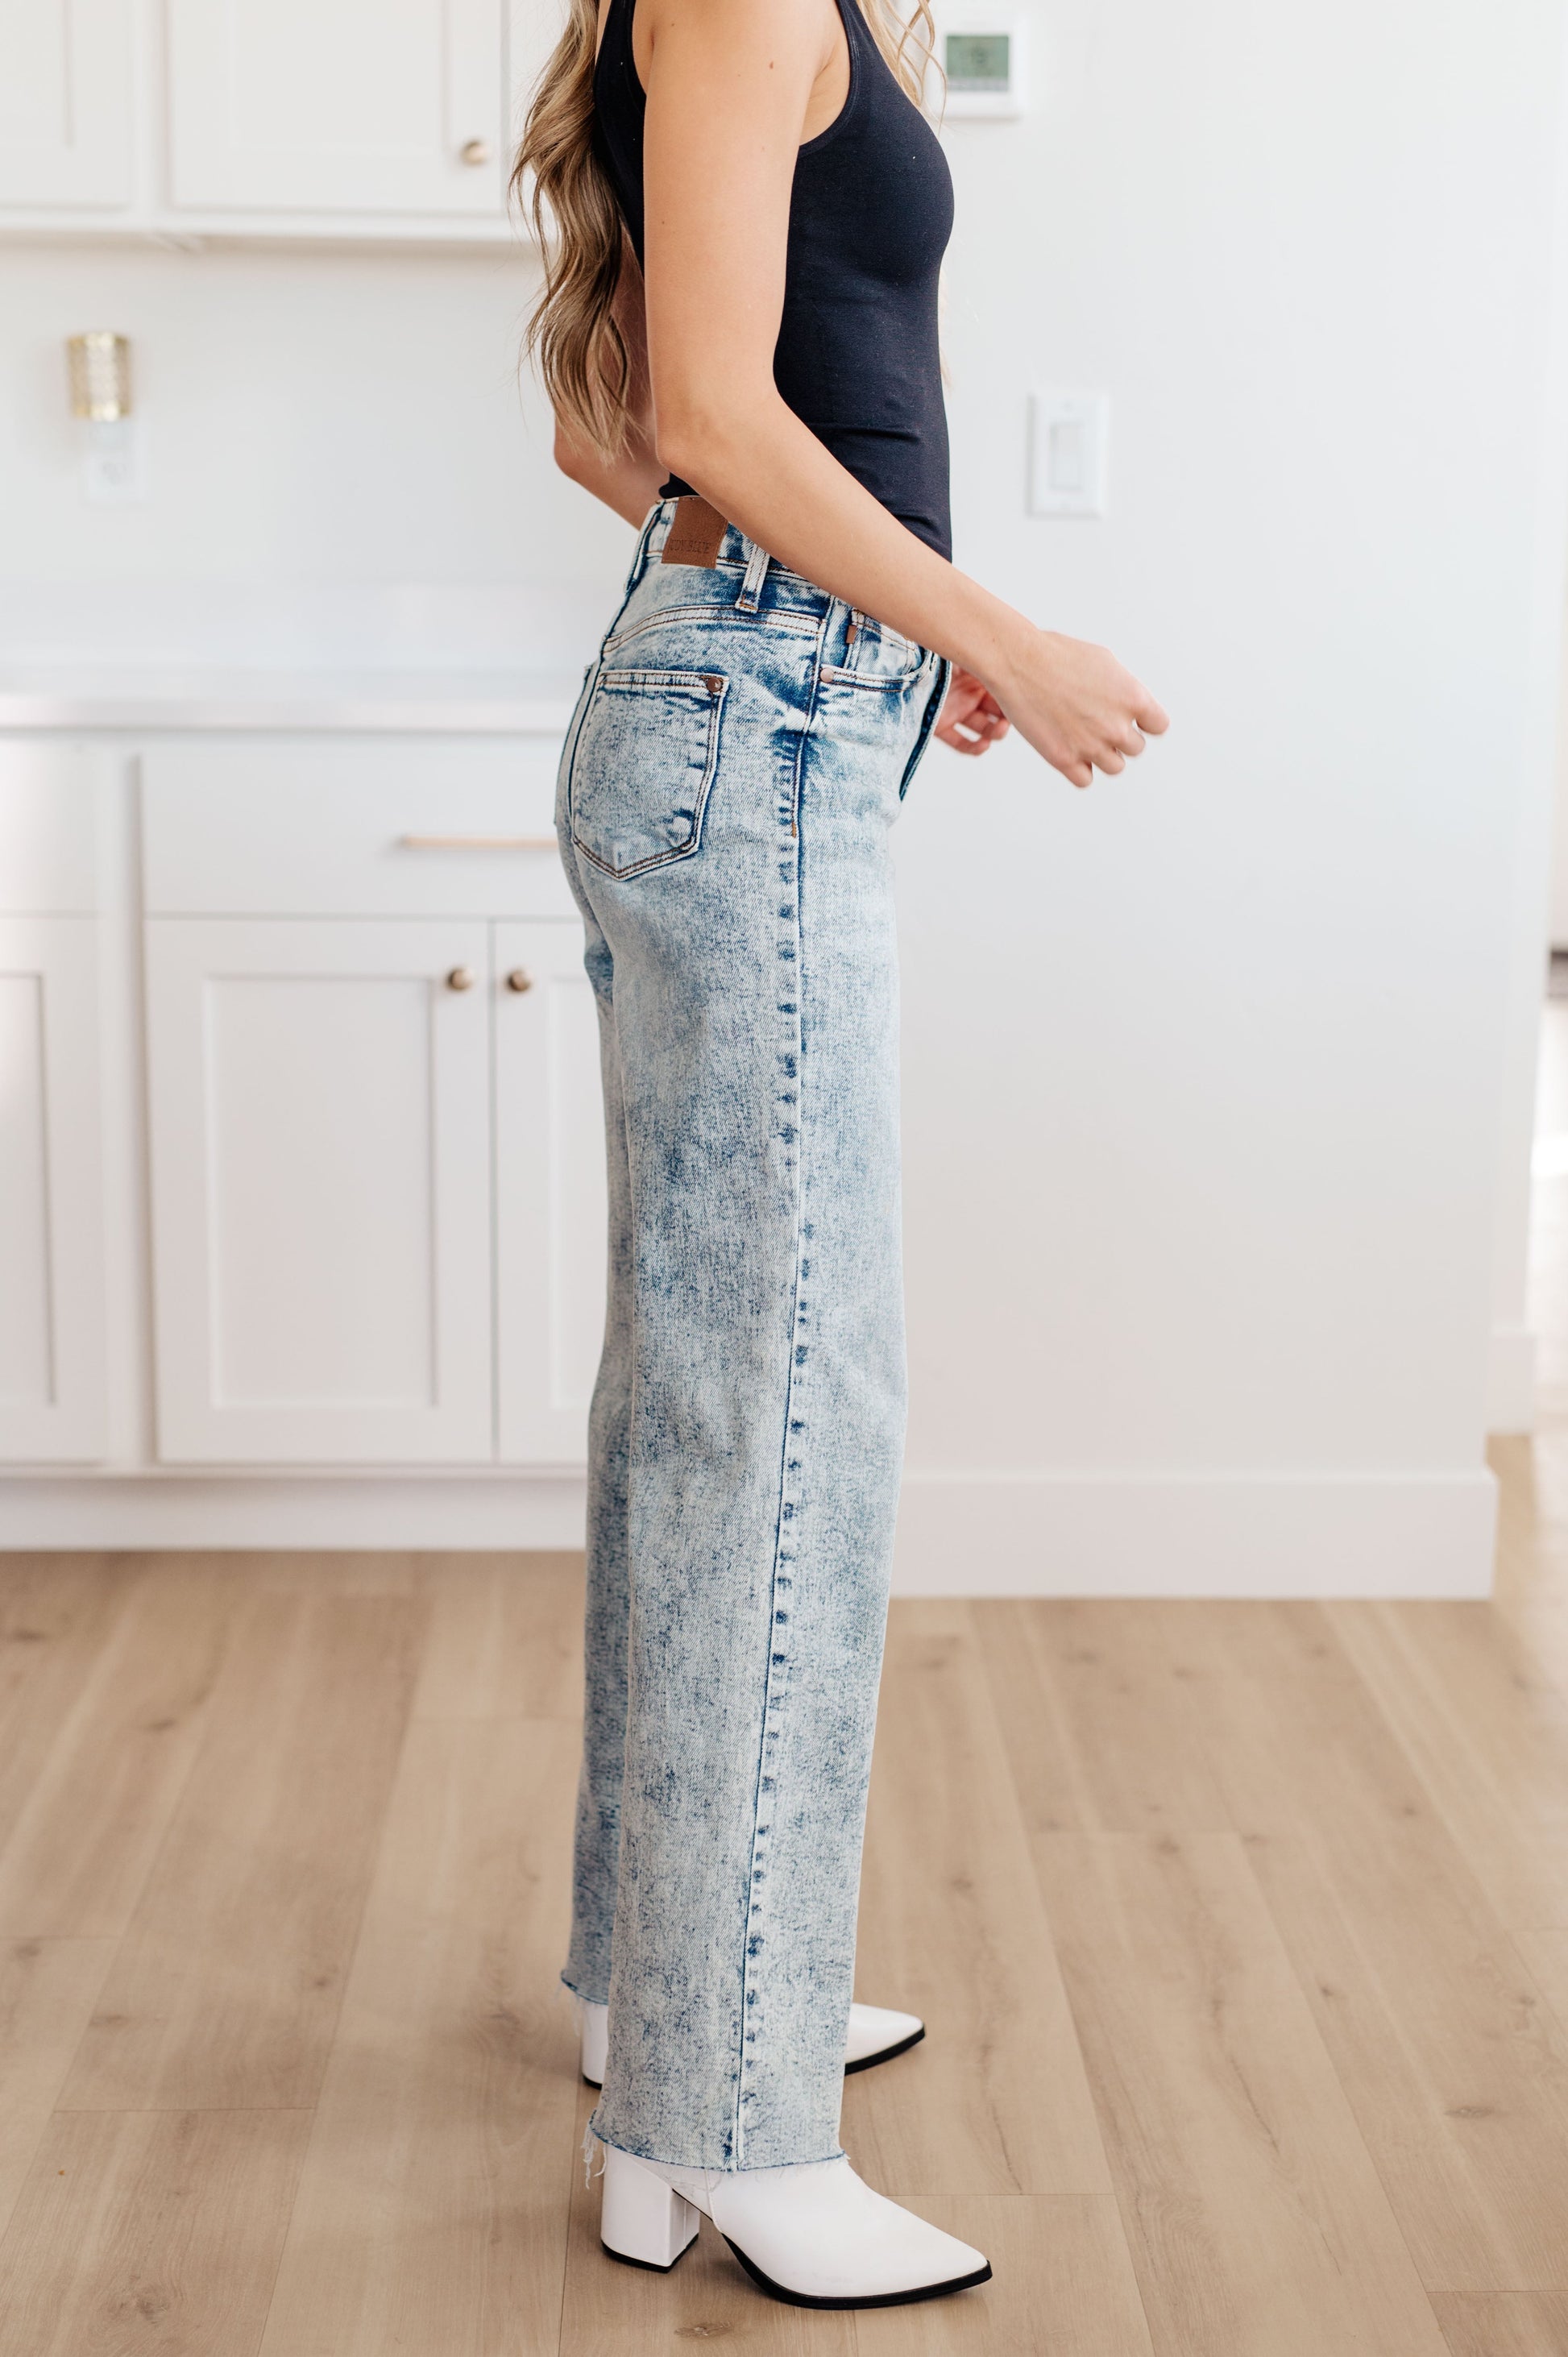 Get ready to elevate your denim game with our Dory High Waist Mineral Wash Raw Hem Wide Leg Jeans from Judy Blue. Designed for comfort with 4-way stretch and a high rise waist, these jeans will give you the perfect fit every time. The mineral wash and raw hem add a touch of style for a versatile and on-trend look 0 - 24W